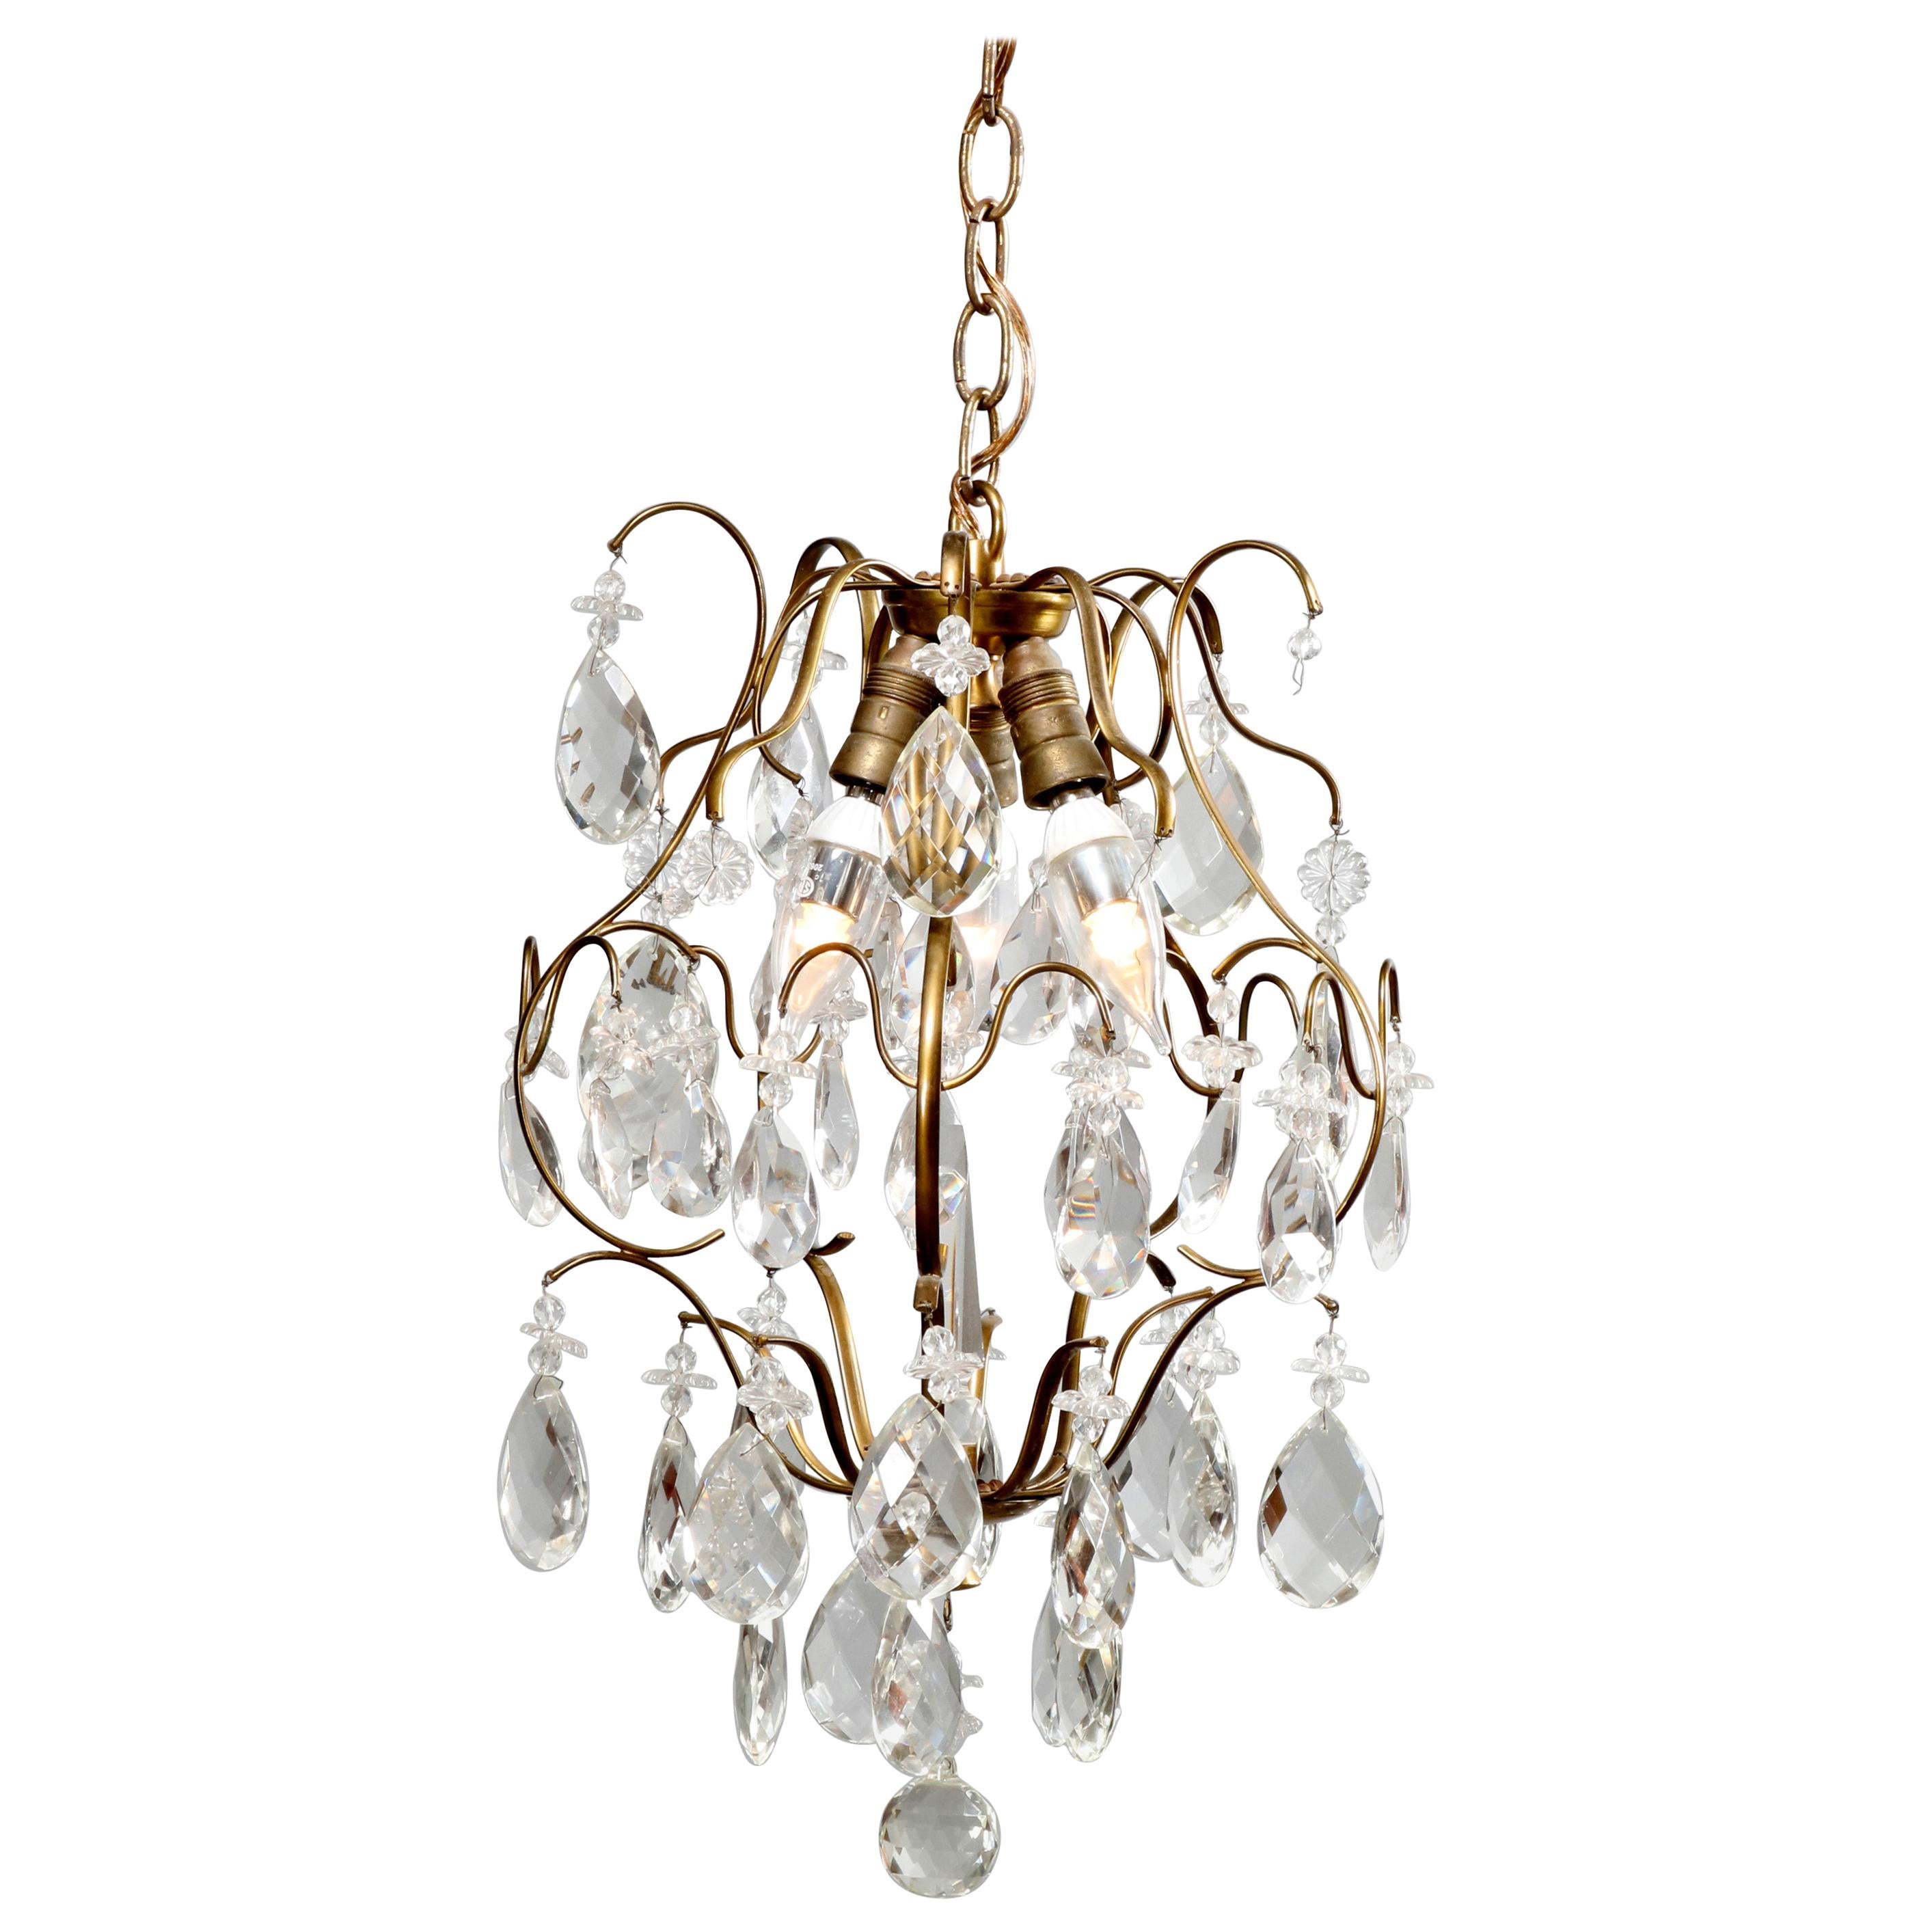 Vintage French Style Brass & Crystal Hanging Hall Light, circa 1940